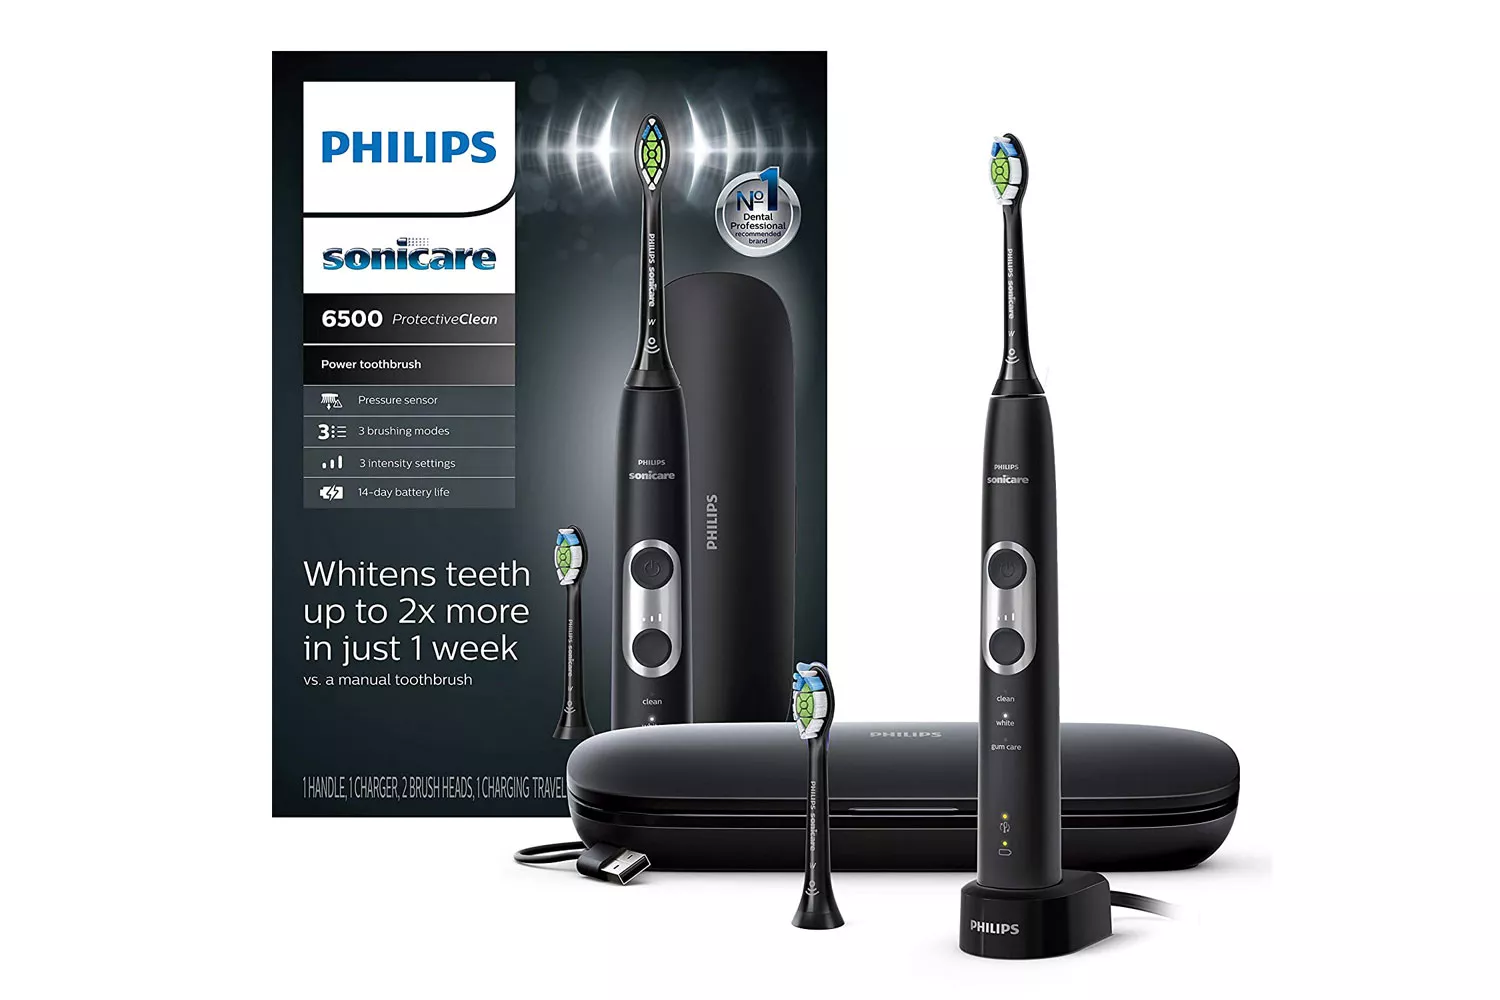 Philips Sonicare ProtectiveClean 6500 Rechargeable Electric Power Toothbrush